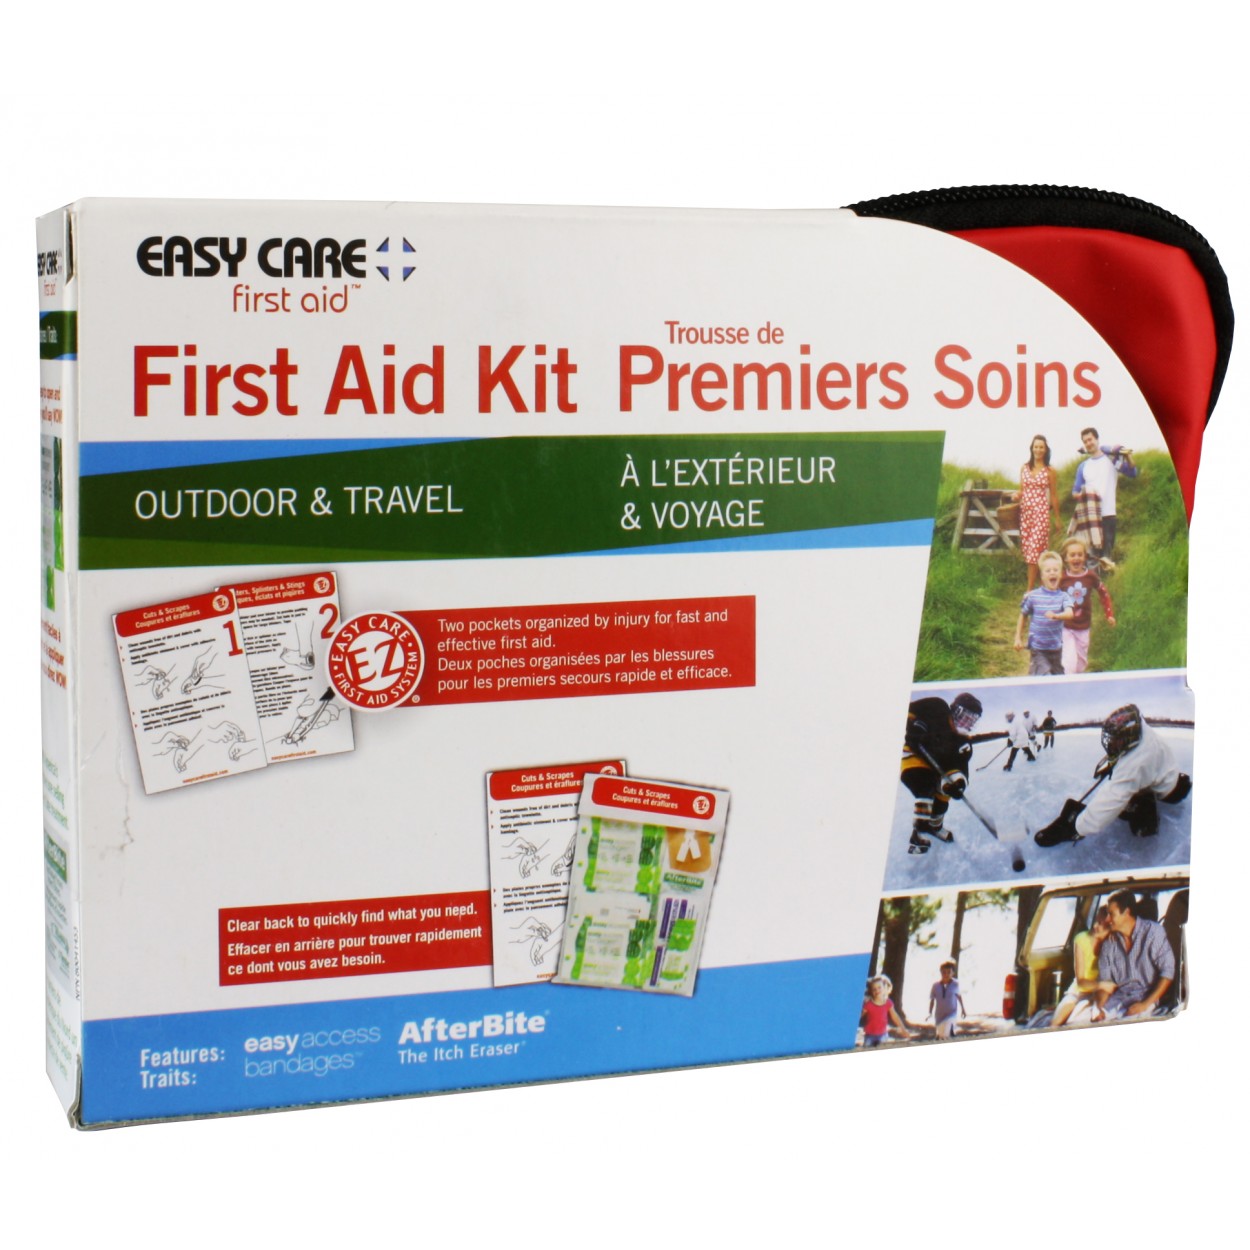 Easy Care Outdoor & Travel First Aid Kit